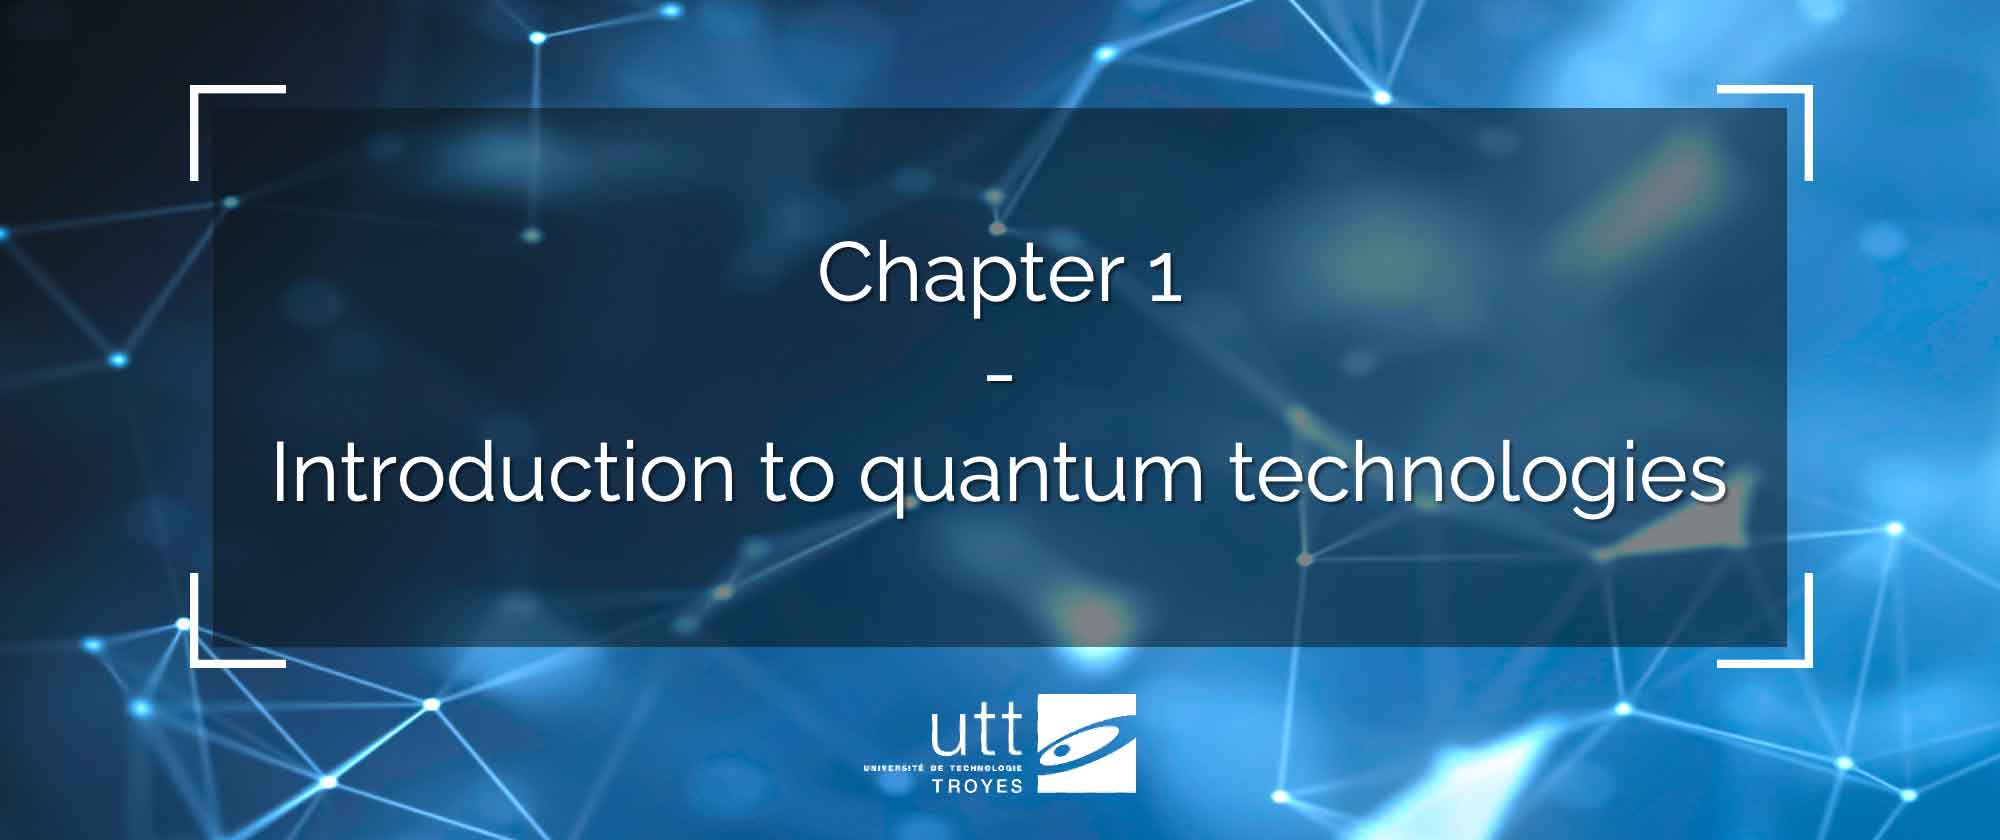 Chapter 1 - Introduction to quantum technologies